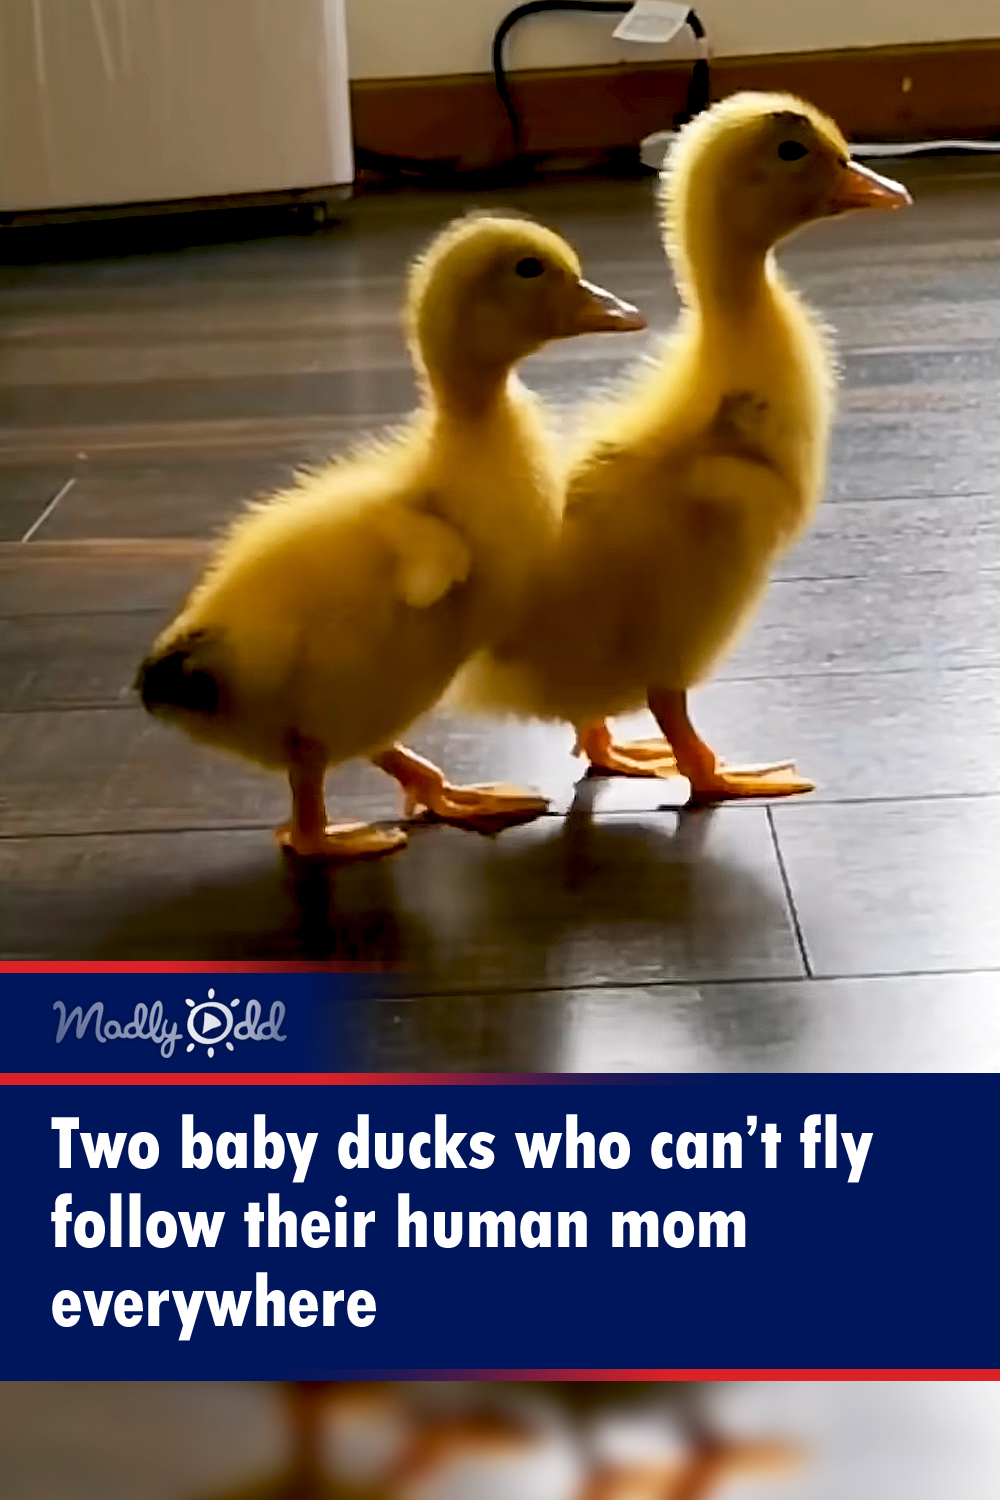 Two little ducks who can’t fly follow their human mom everywhere